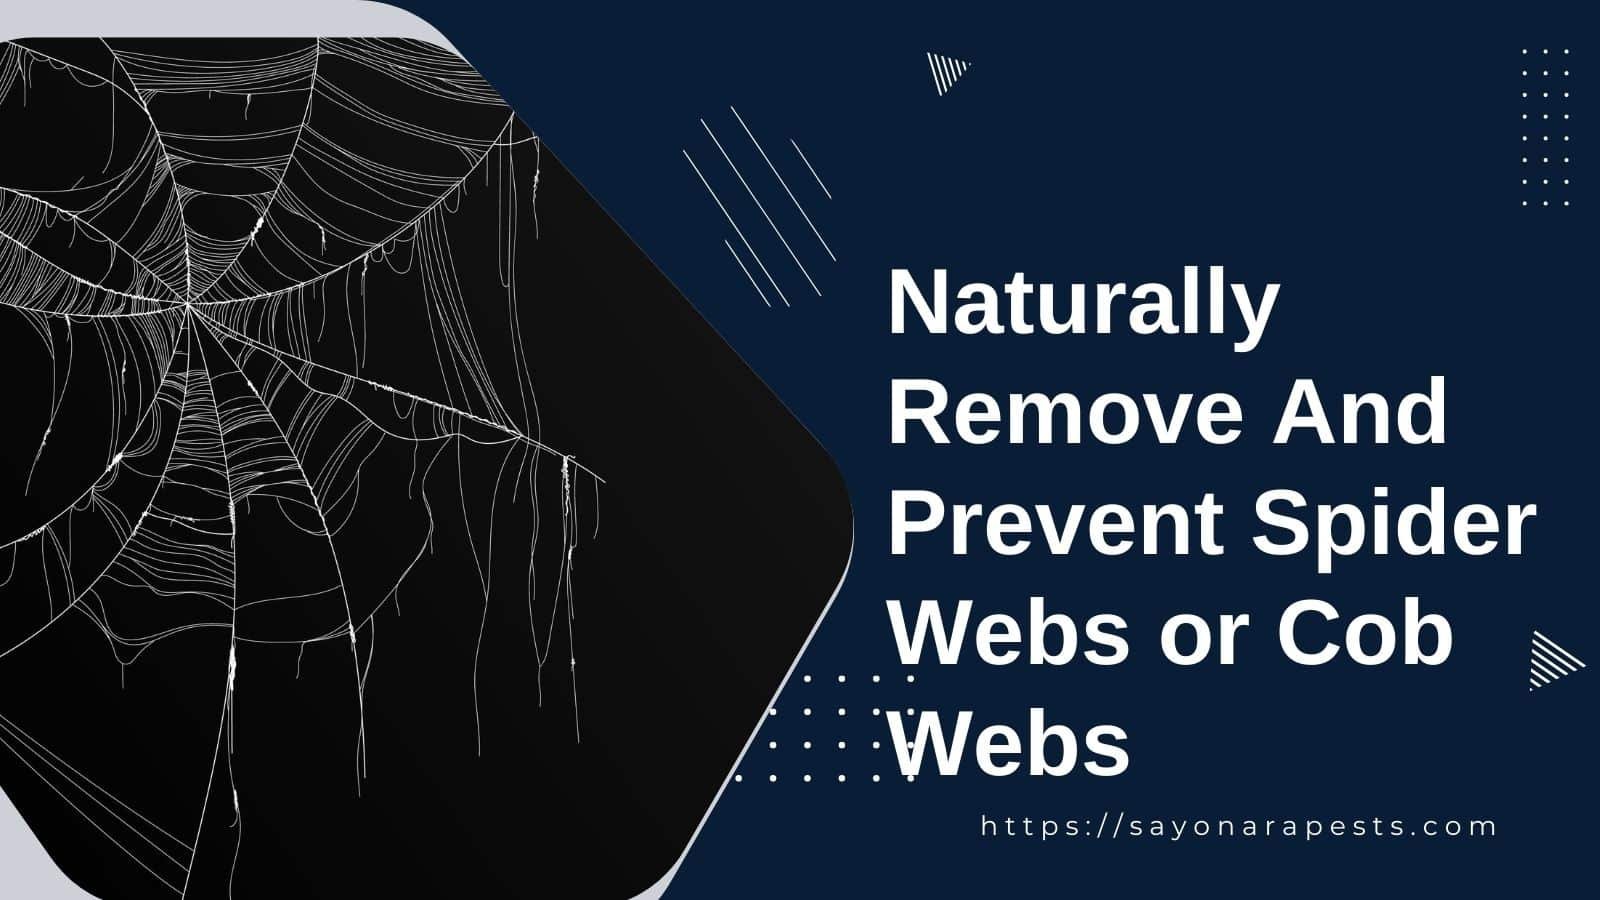 How To Naturally Remove And Prevent Spider Webs Or Cob Webs Sayonara Pests 4007